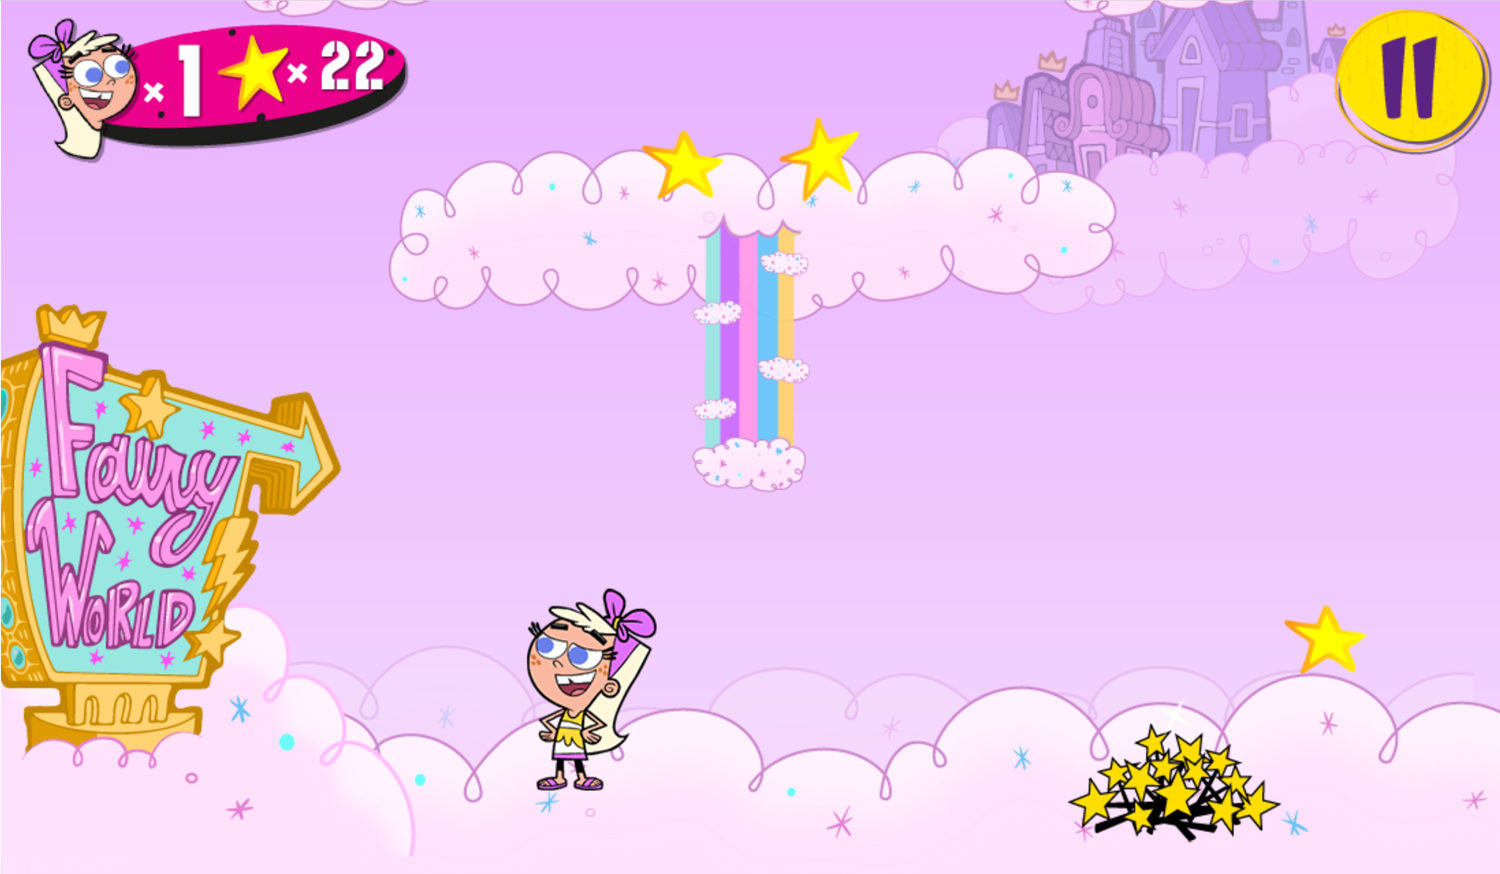 The Fairly OddParents The Fairly odd Squad Game Fairy World Screenshot.